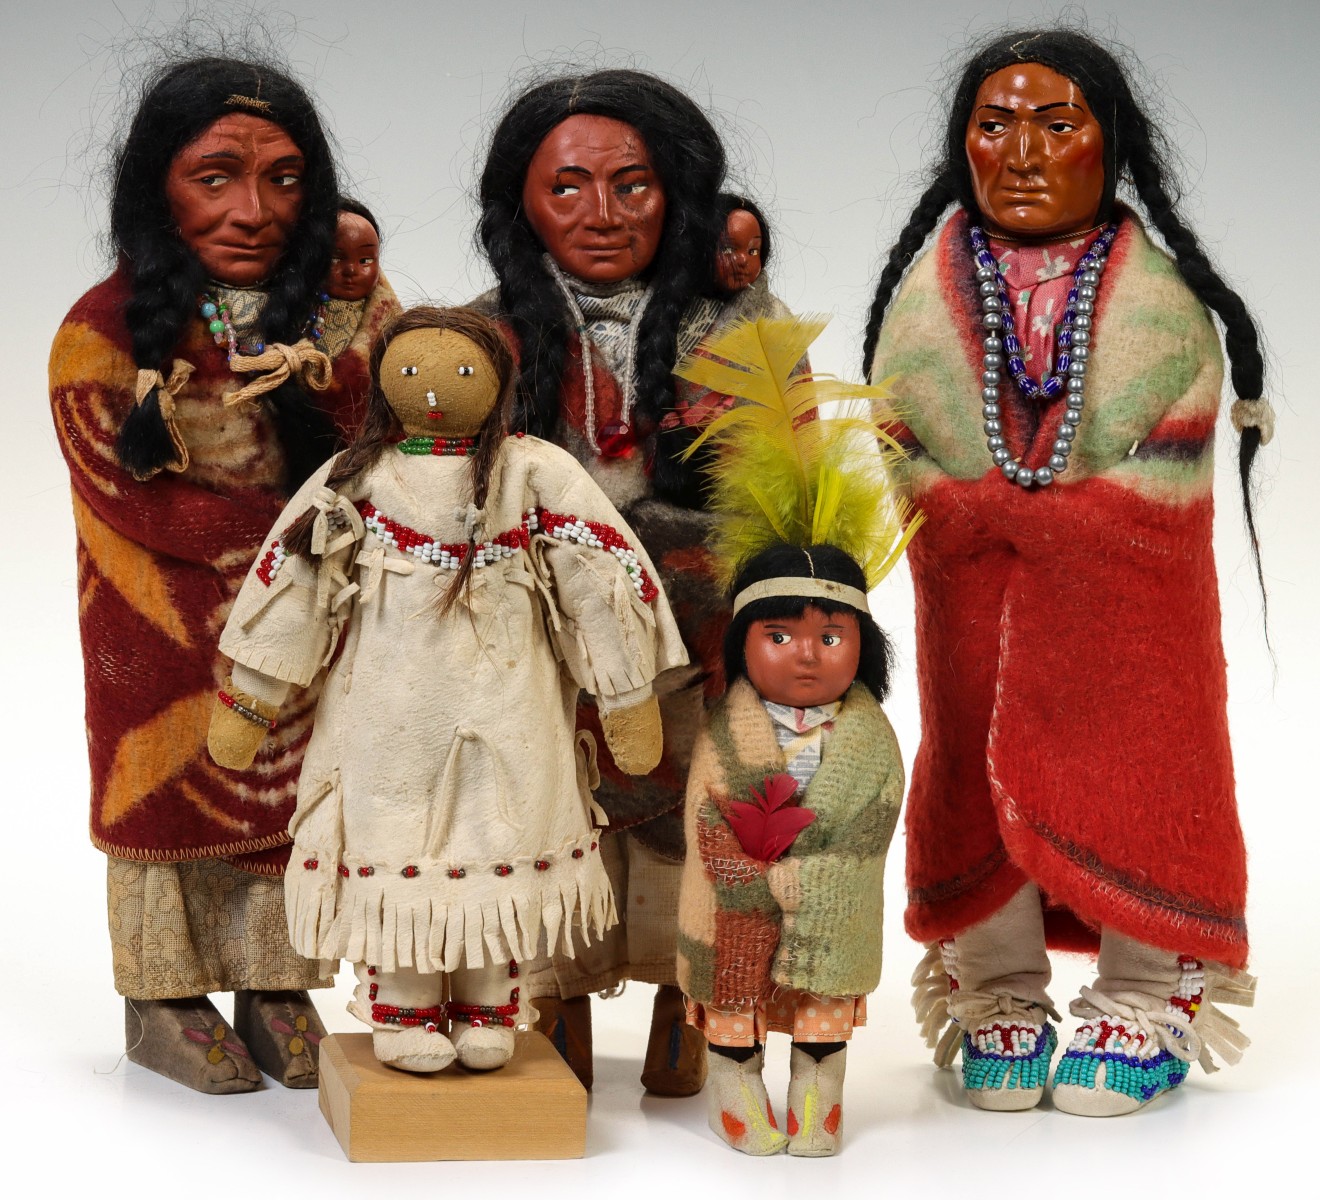 SKOOKUM AND OTHER NATIVE AMERICAN THEME DOLLS